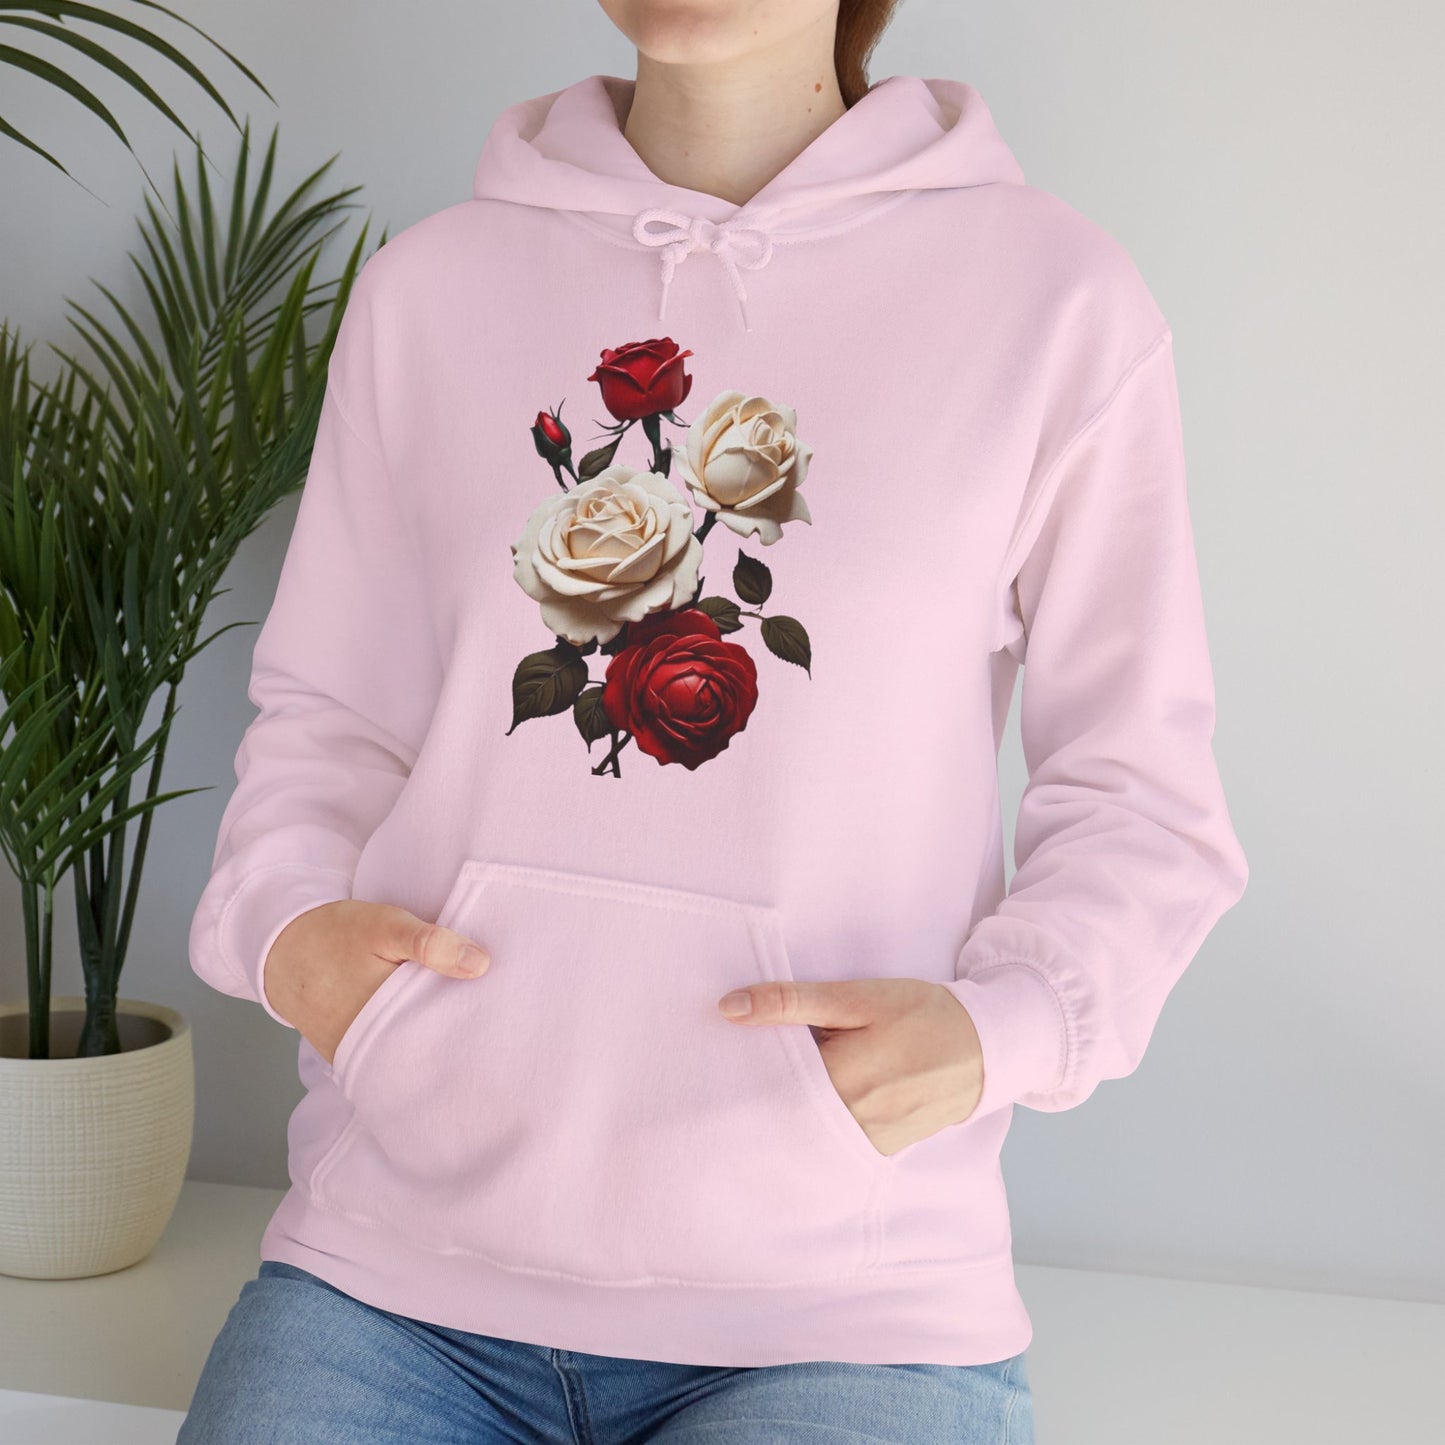 Red and White Roses - Unisex Hooded Sweatshirt